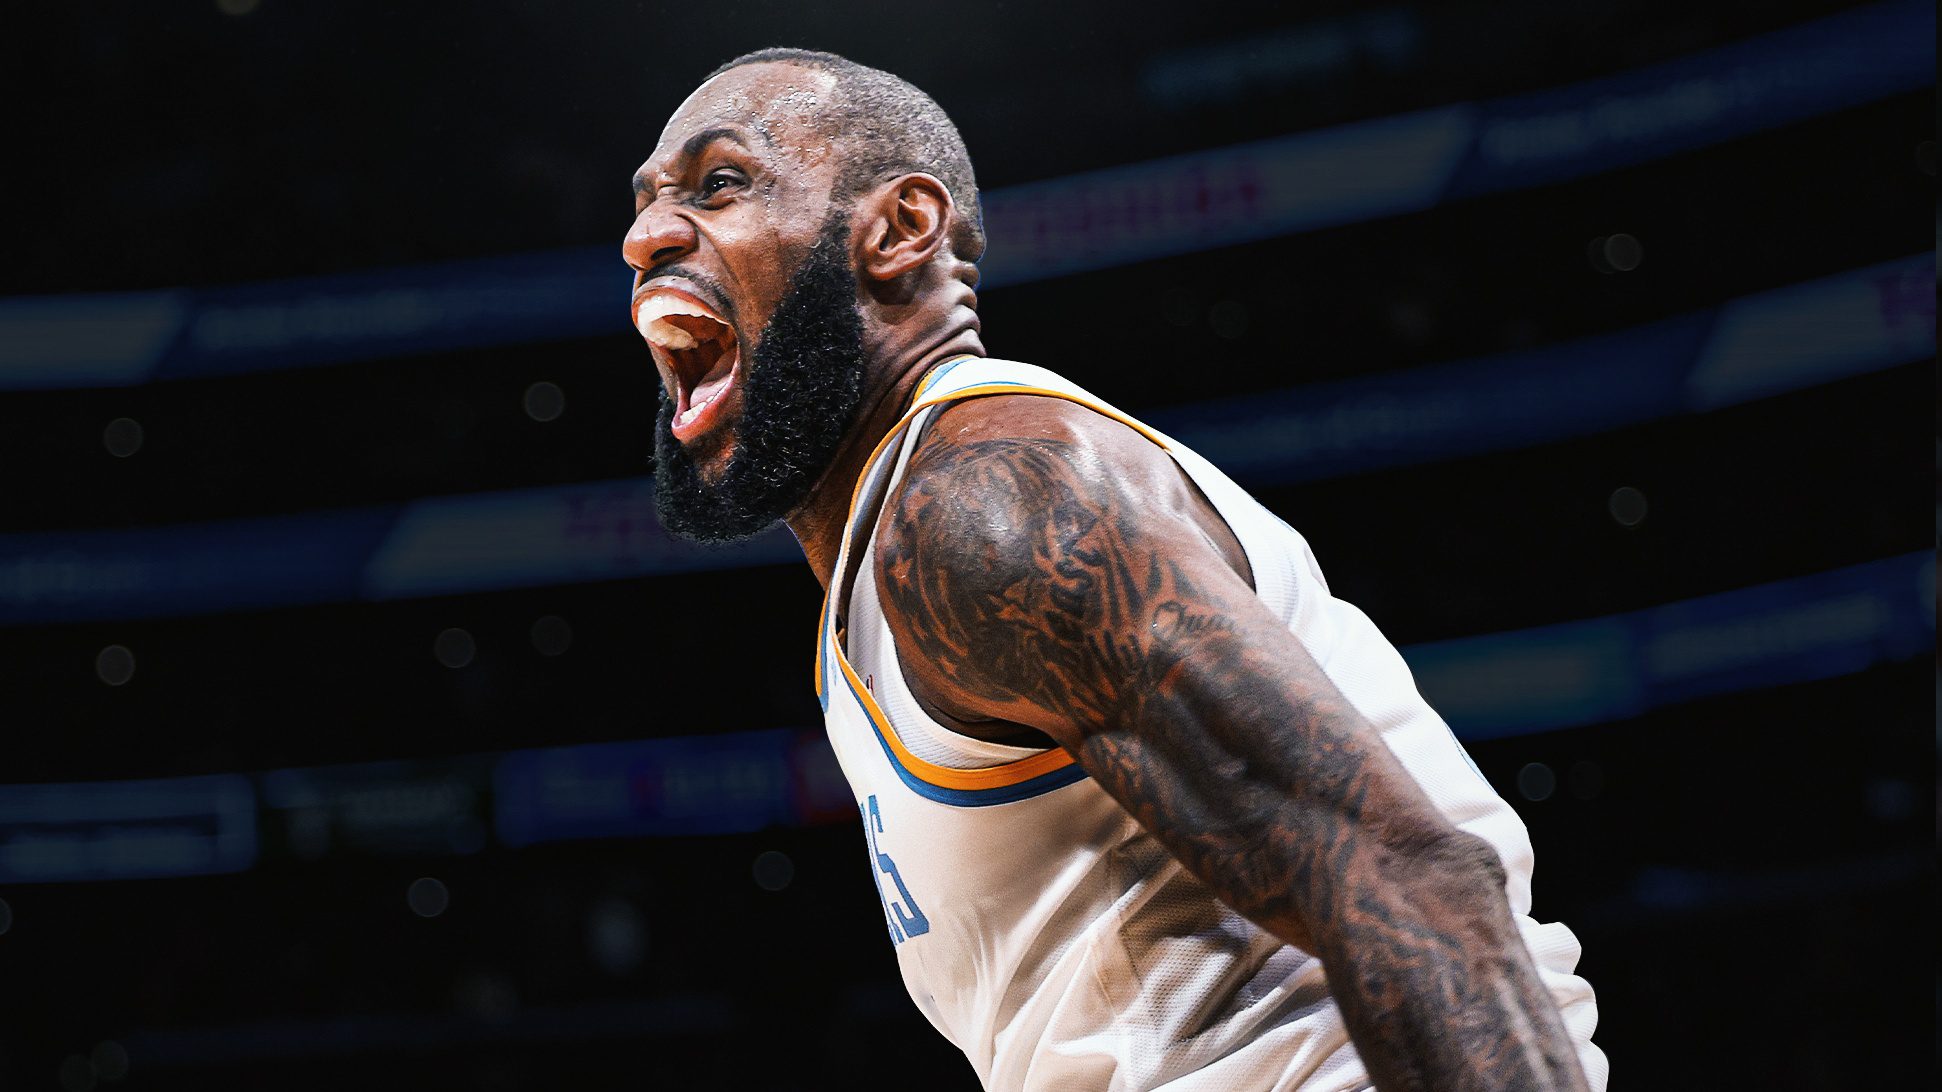 Every Scenario for When Exactly LeBron Will Become No.1 in All-Time Scoring